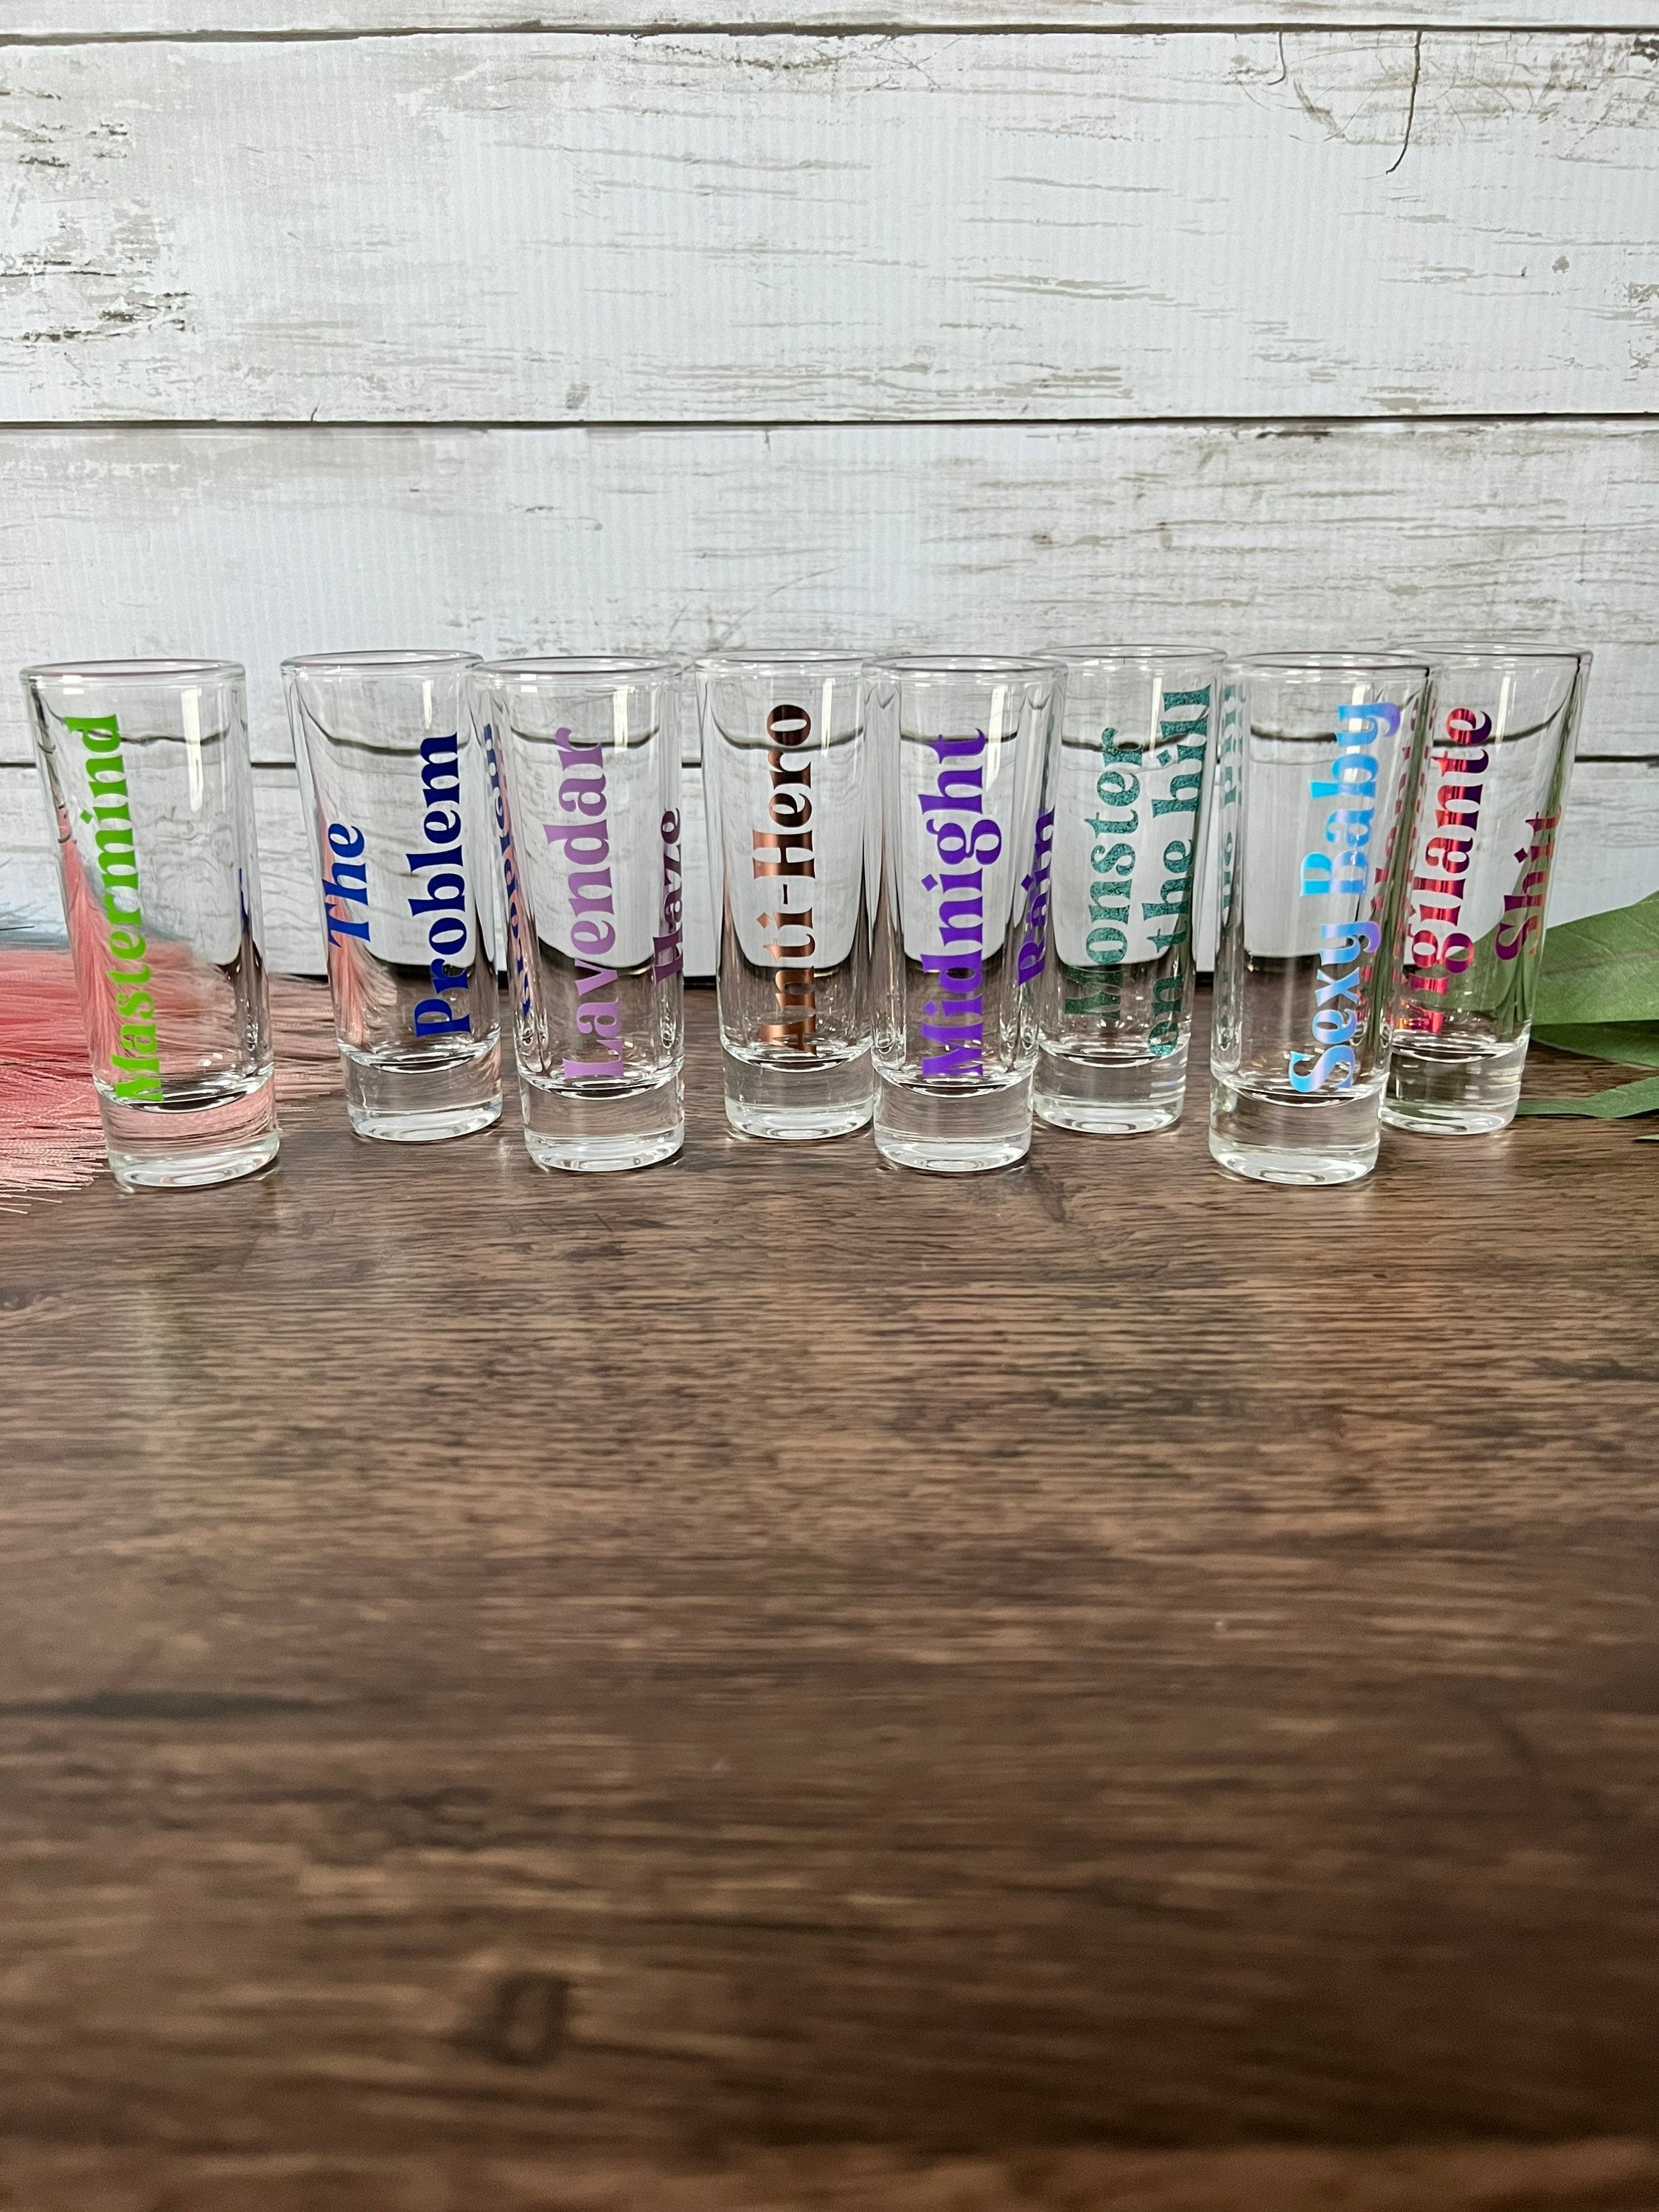 Taylor Swift Shot Glasses For $8 In Highl&s Ranch, CO